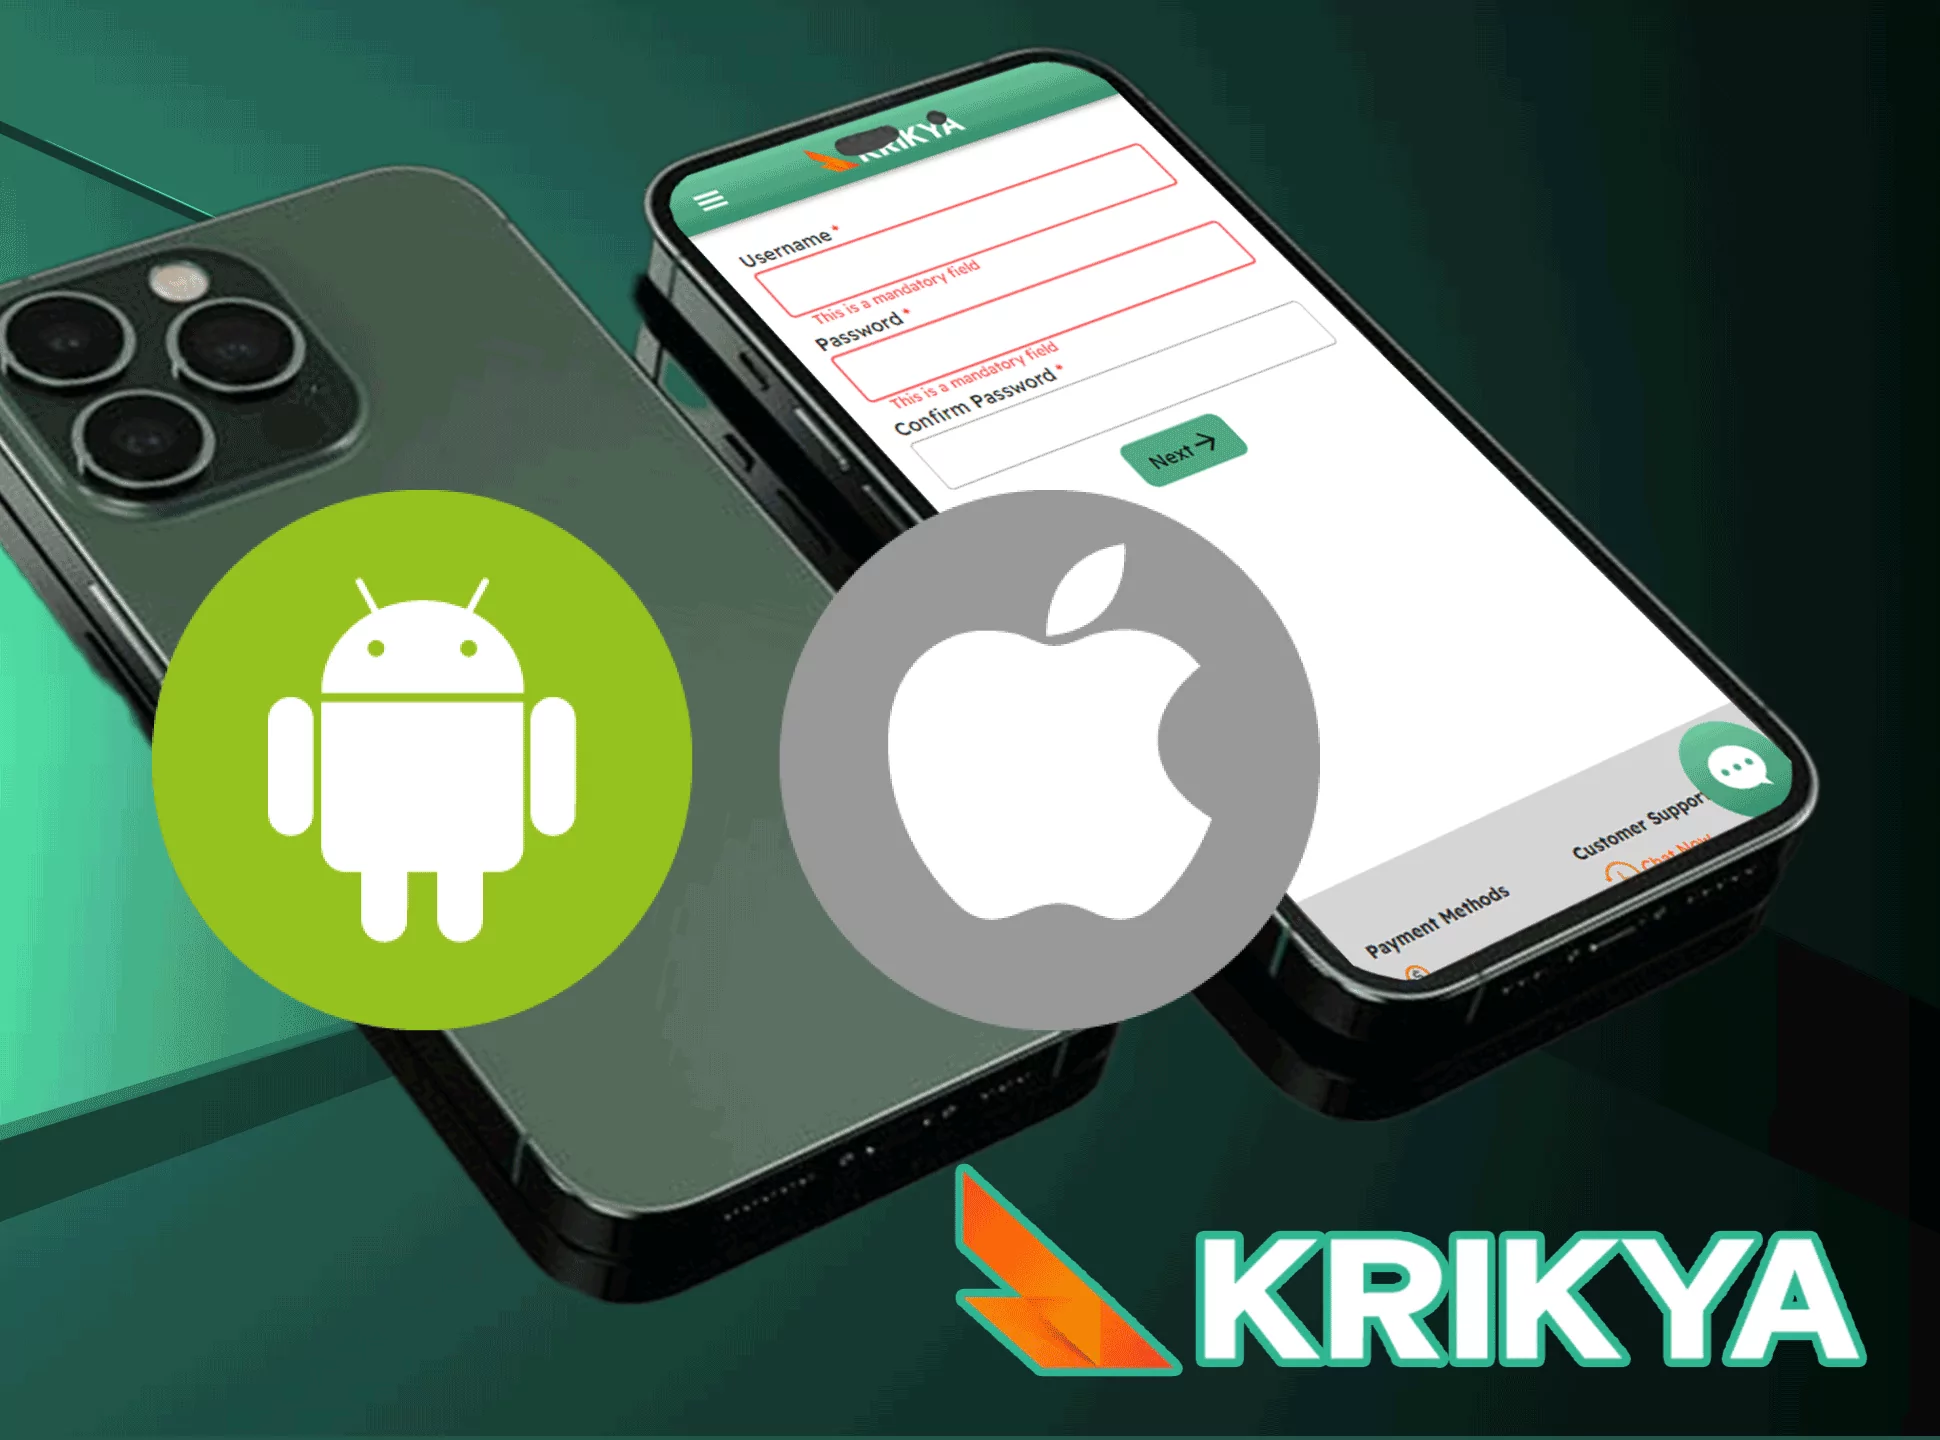 You can also sign up for Krikya in its mobile app.